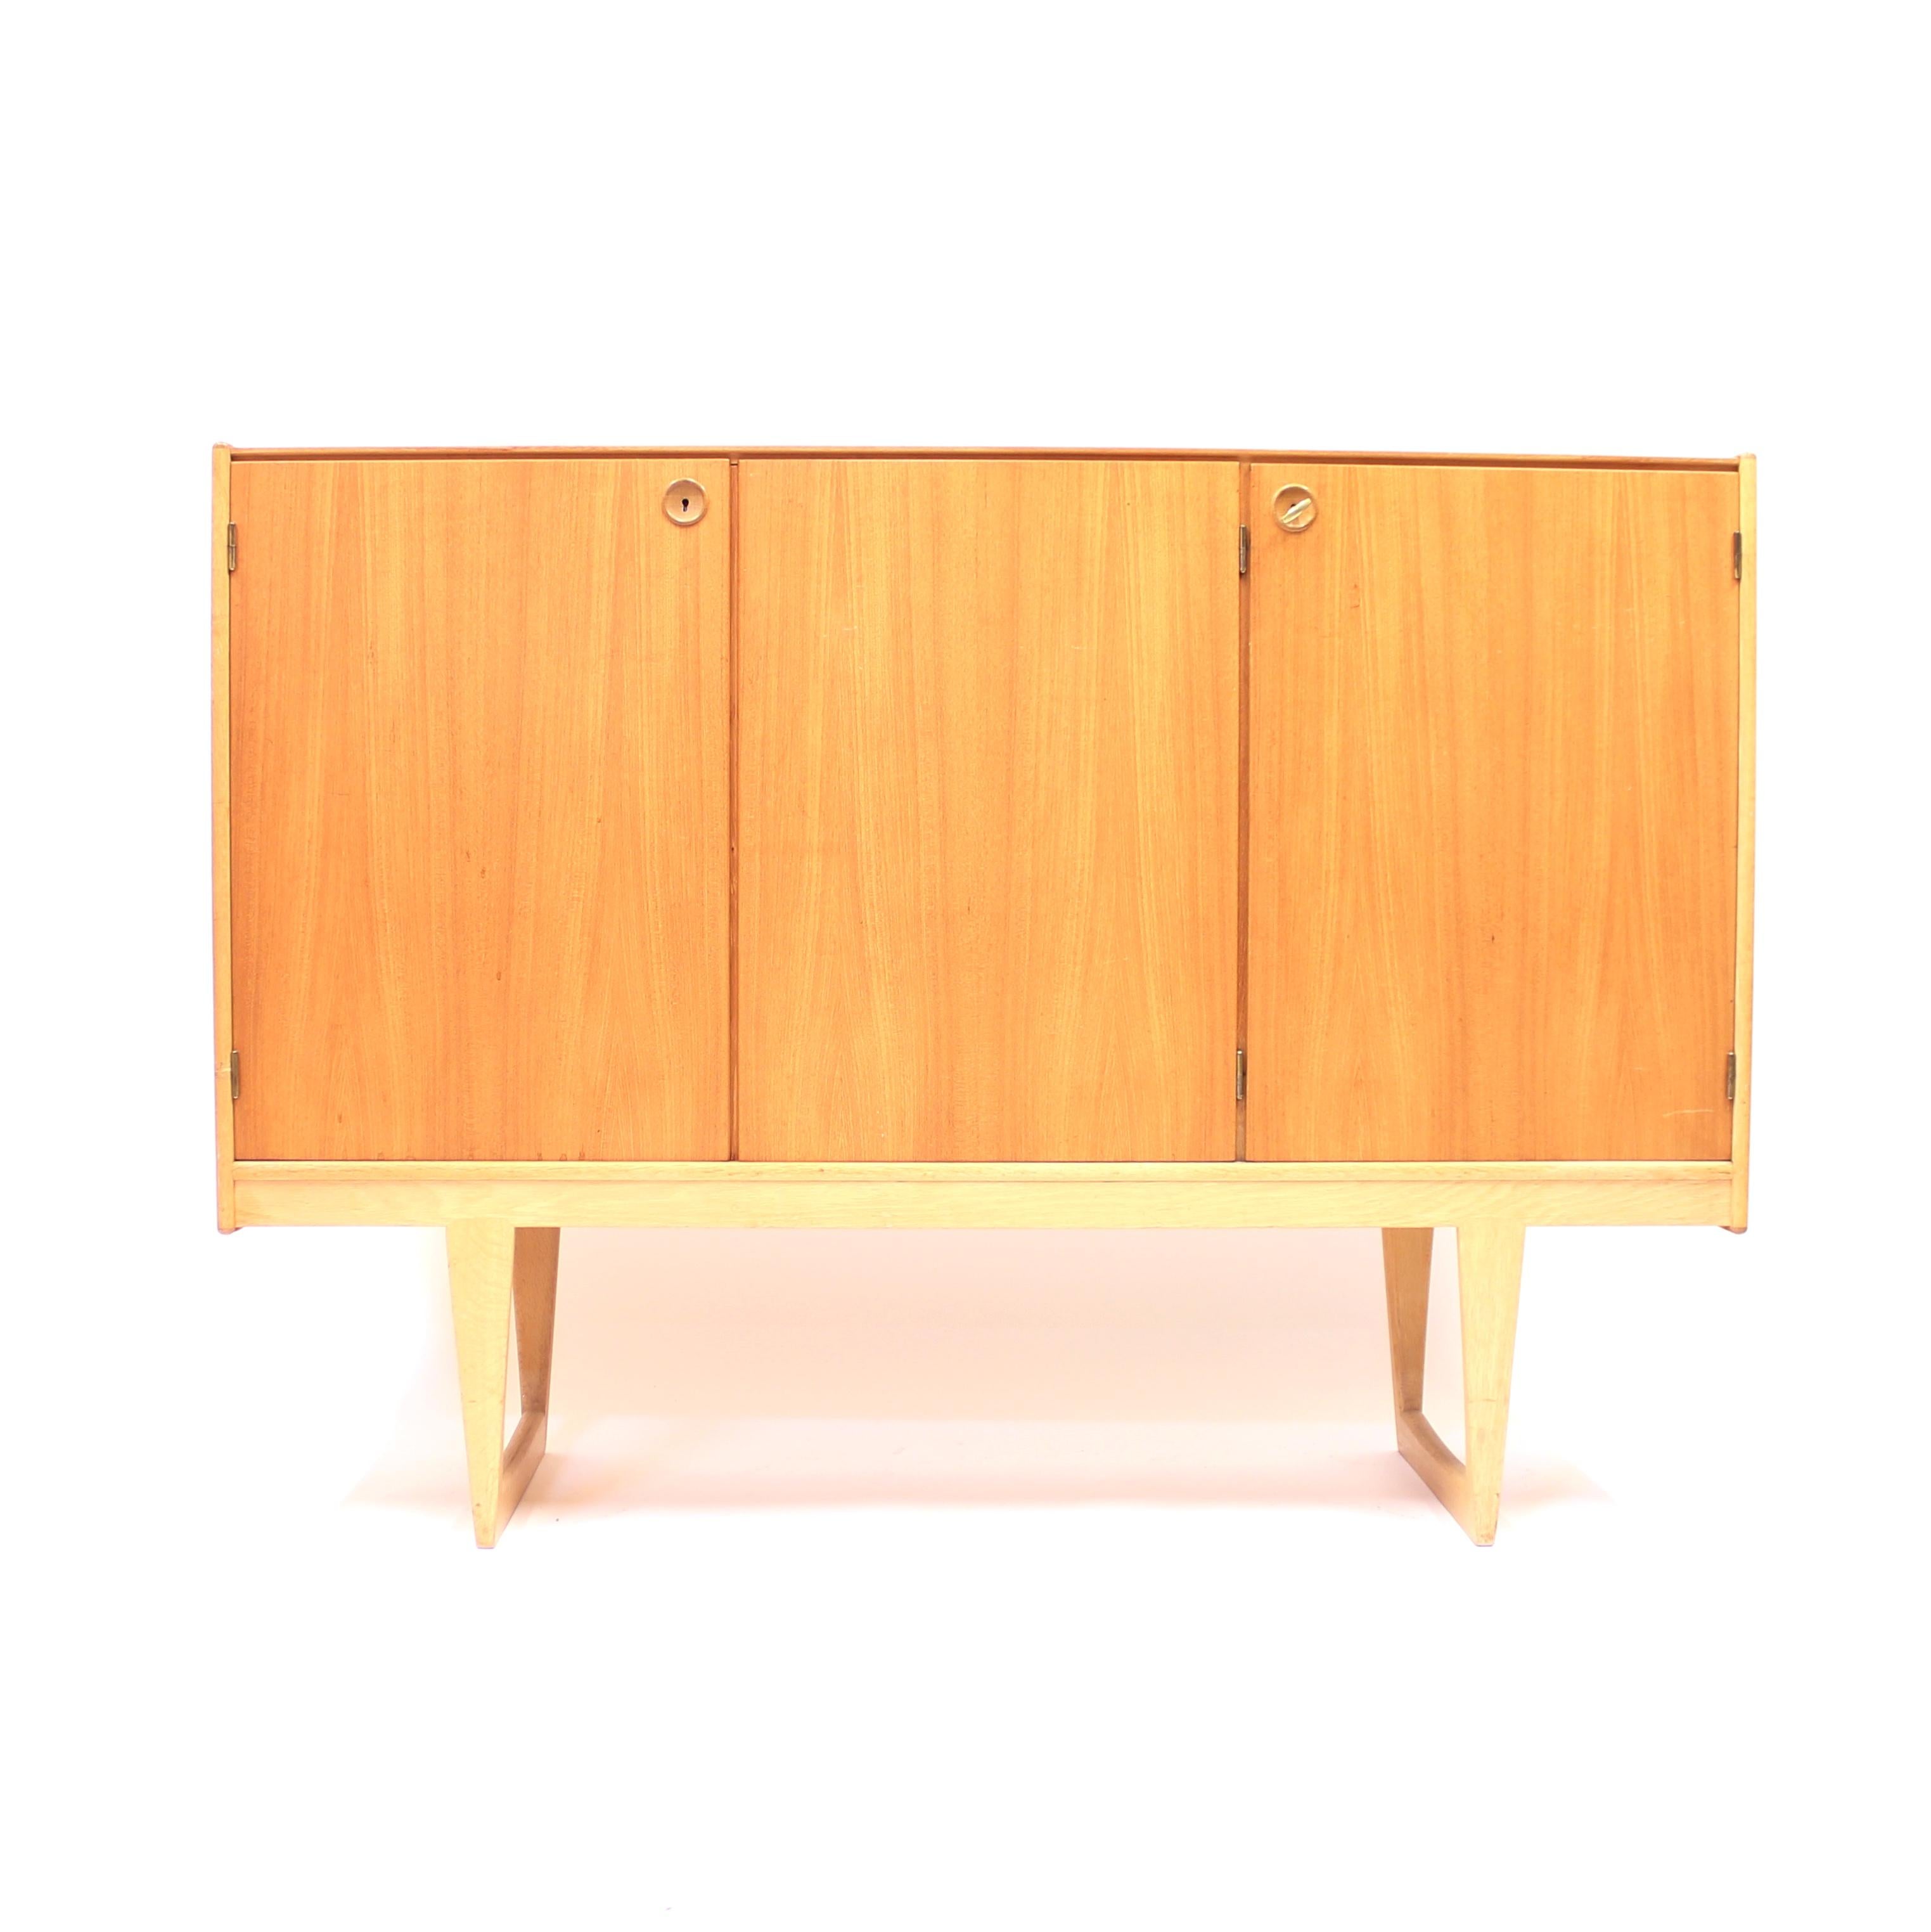 Sideboard, model Tokyo, made from teak and oak designed by Yngvar Sandström for NK (Nordiska Kompaniet) in 1959. This is the largest and tallest, quite rare, example in the series with three front doors hiding shelves and three drawers to the right.